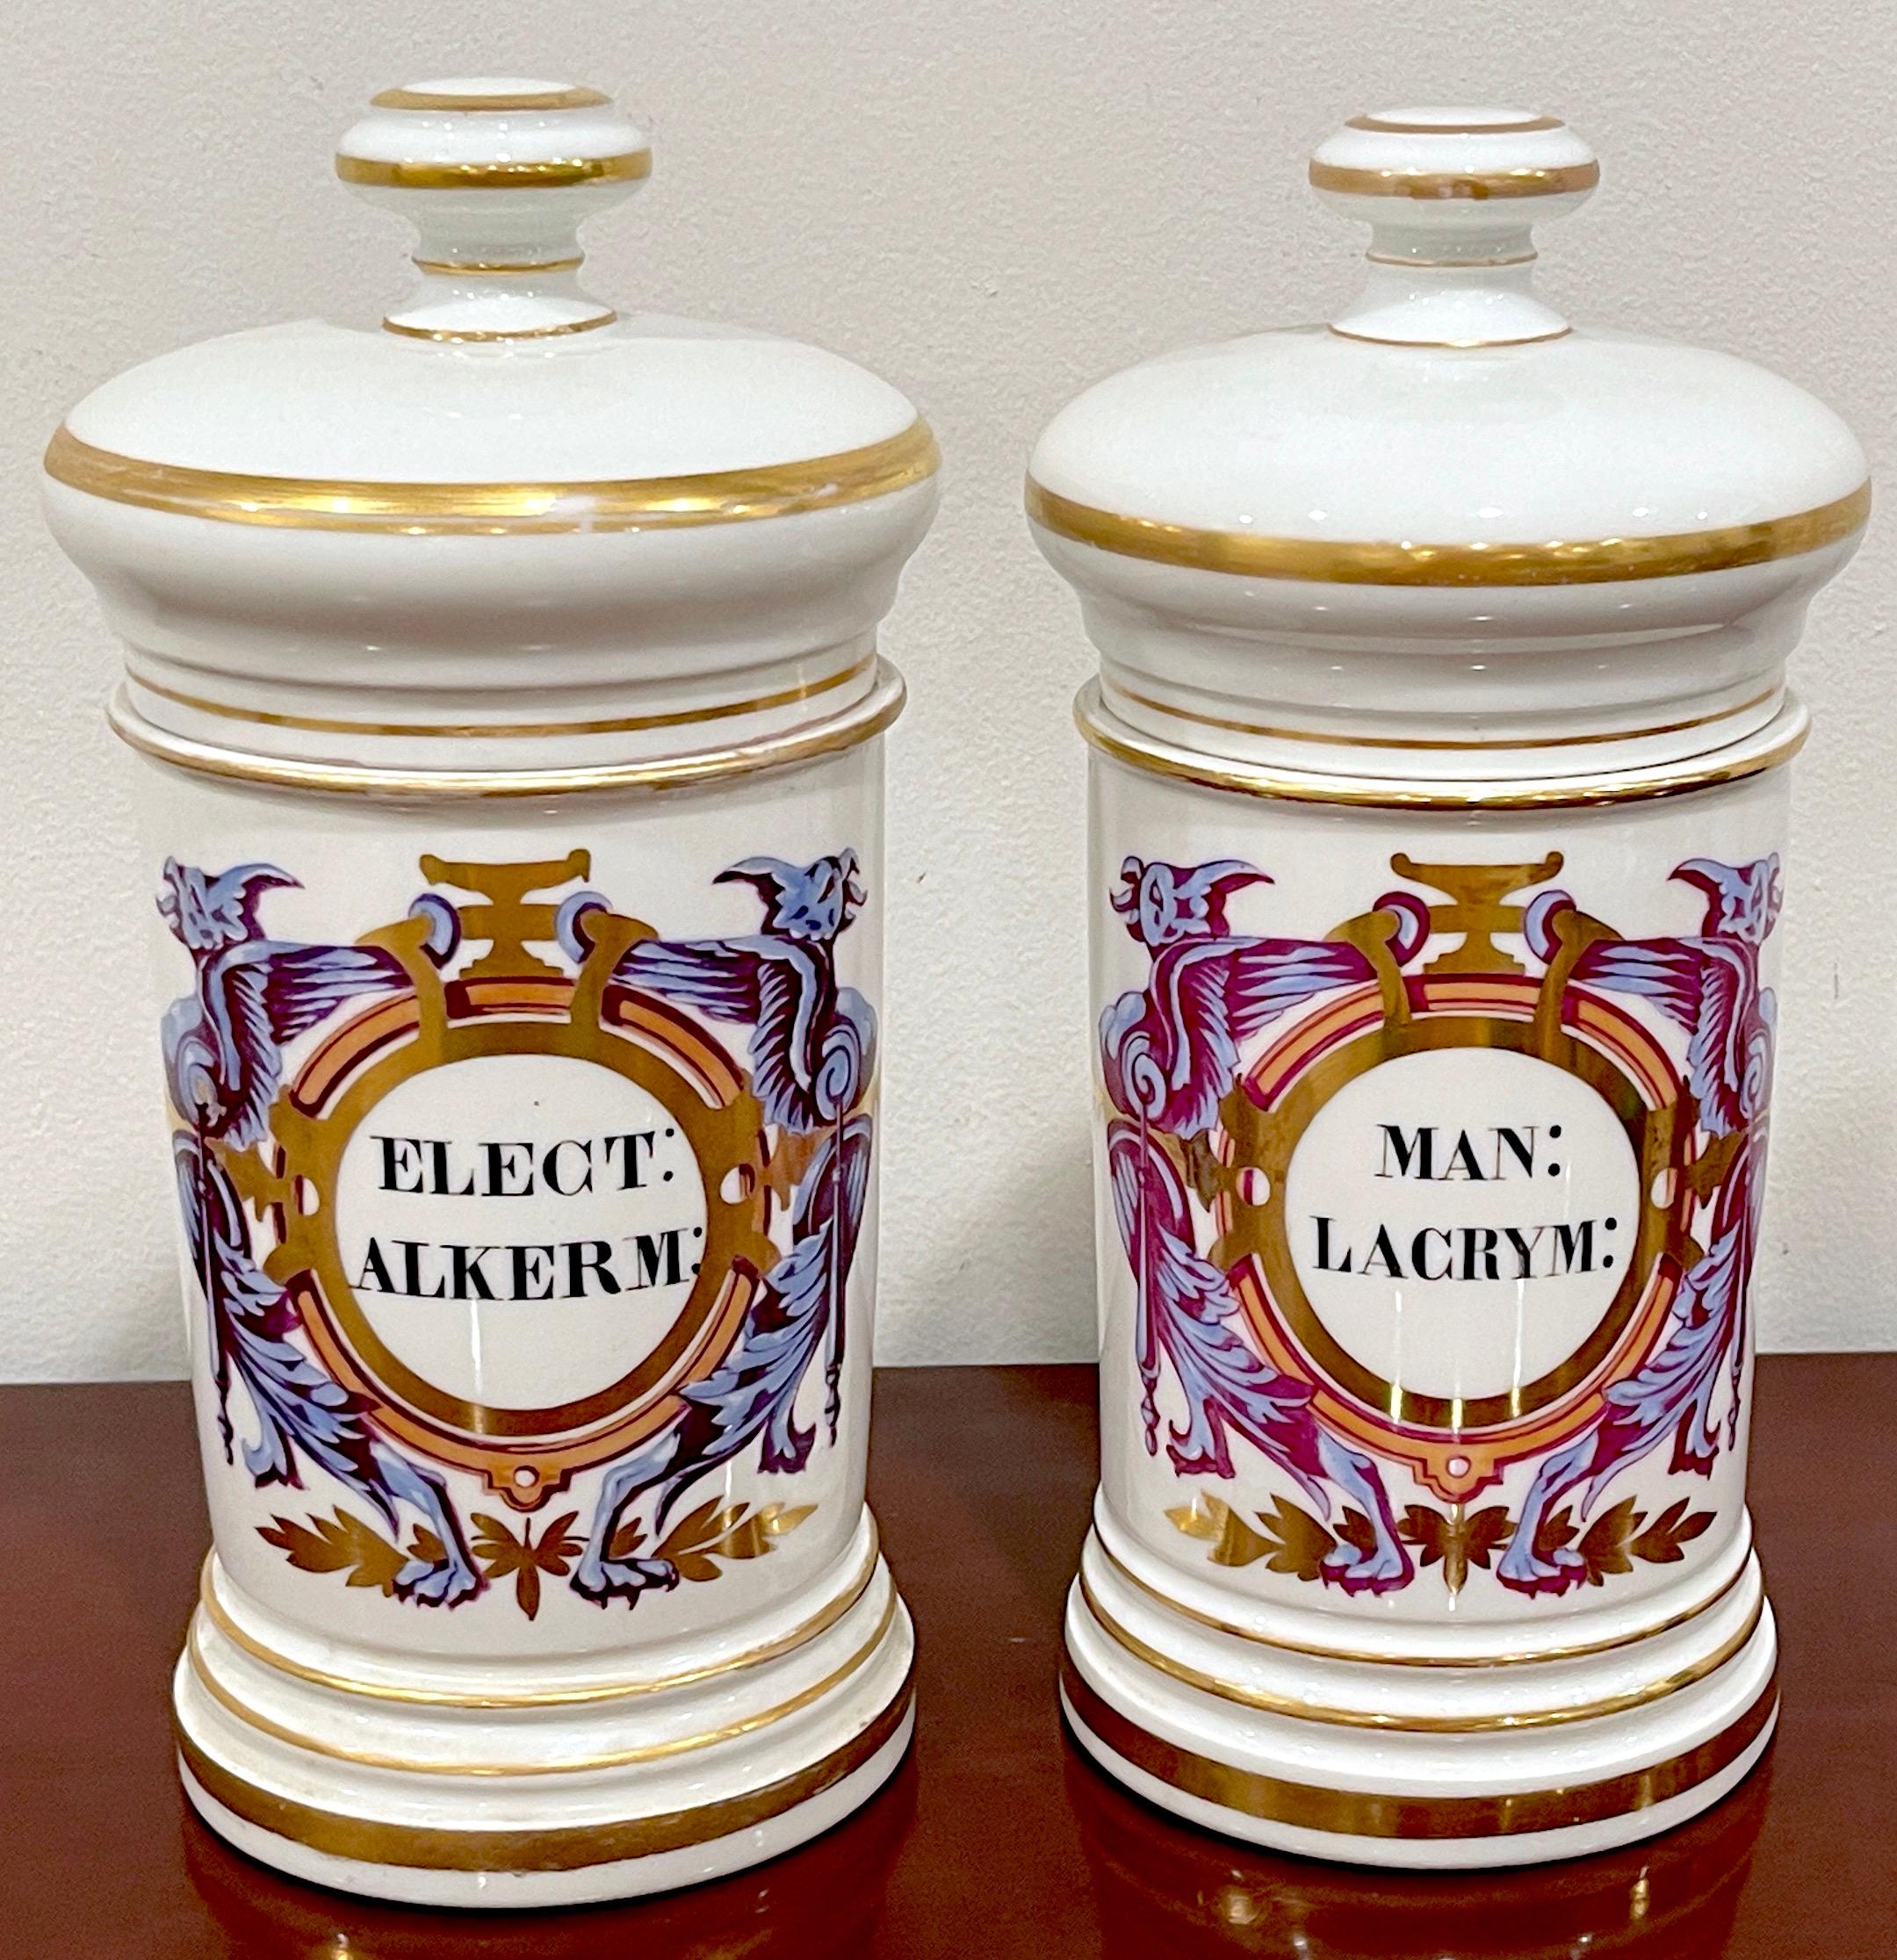 Pair of Neoclassical Apothecary Jars by Maison A Collin Porcelaines & Cristaux
France, Circa 1870s
Signed : Maison A Collin Porcelaines & Cristaux a Collin paris 90 Rue de Rivoli 

We are pleased to offer this exquisite Pair of Neoclassical